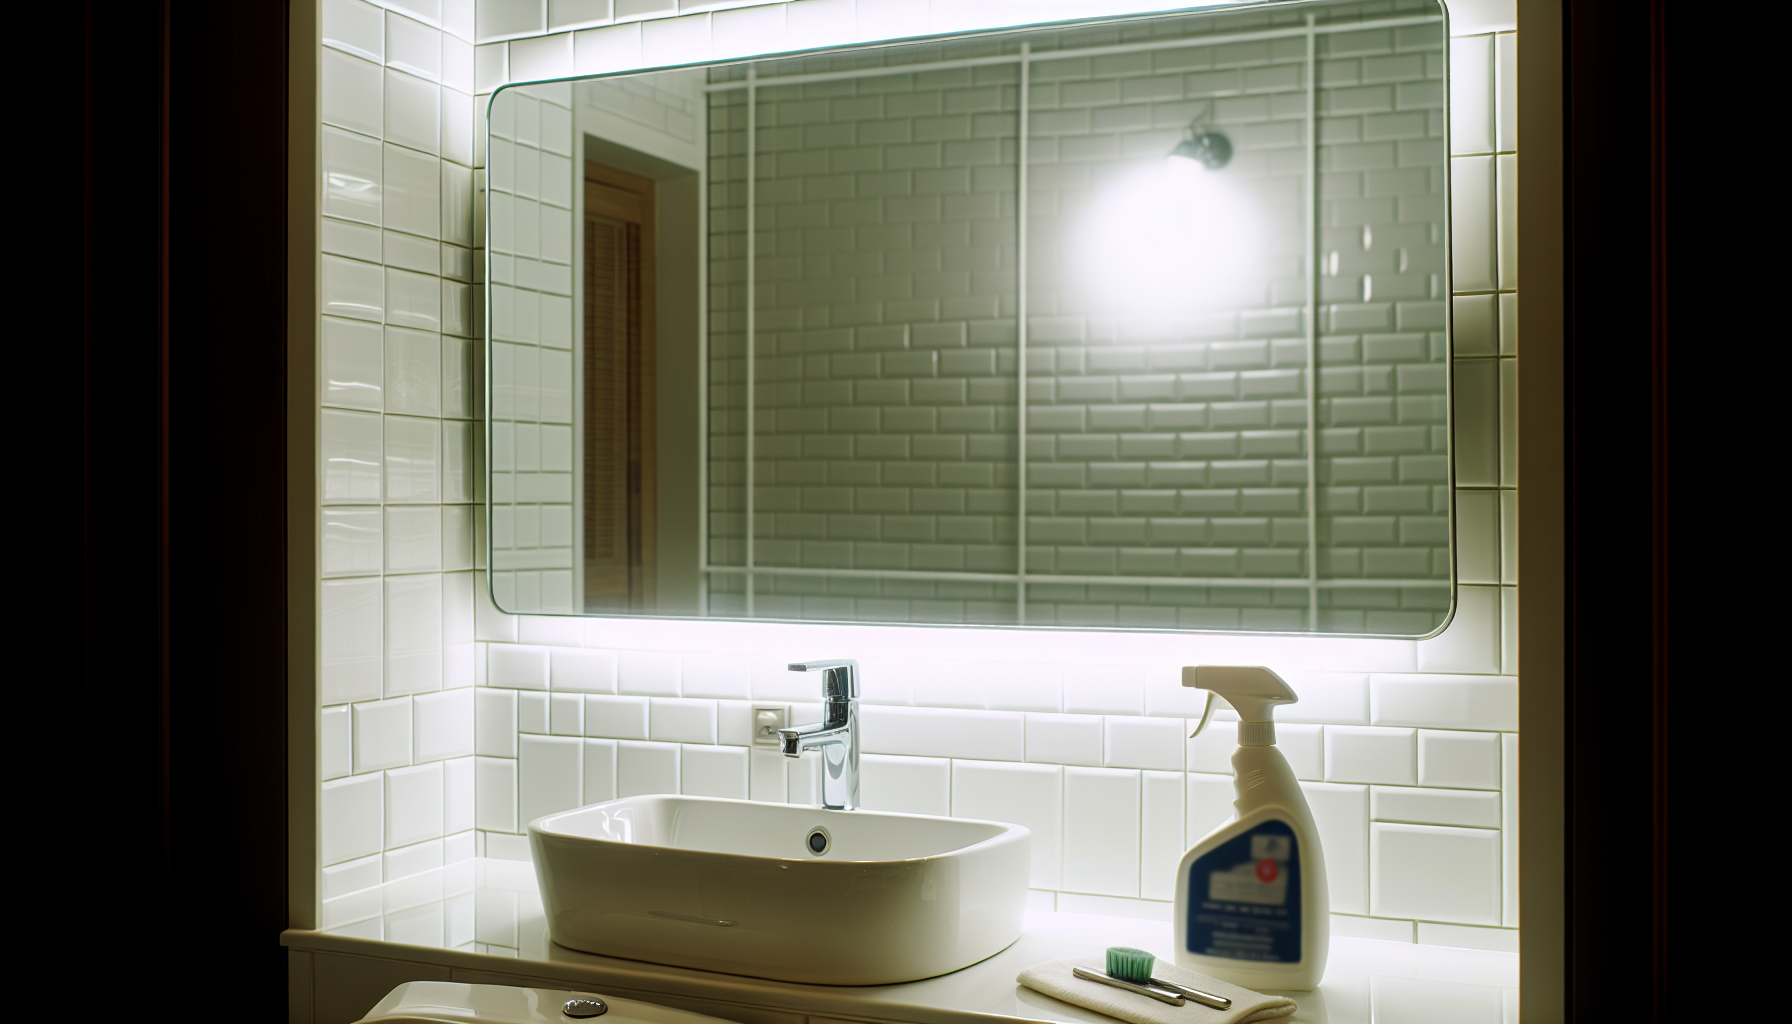 Clean and sanitized bathroom with sparkling mirror